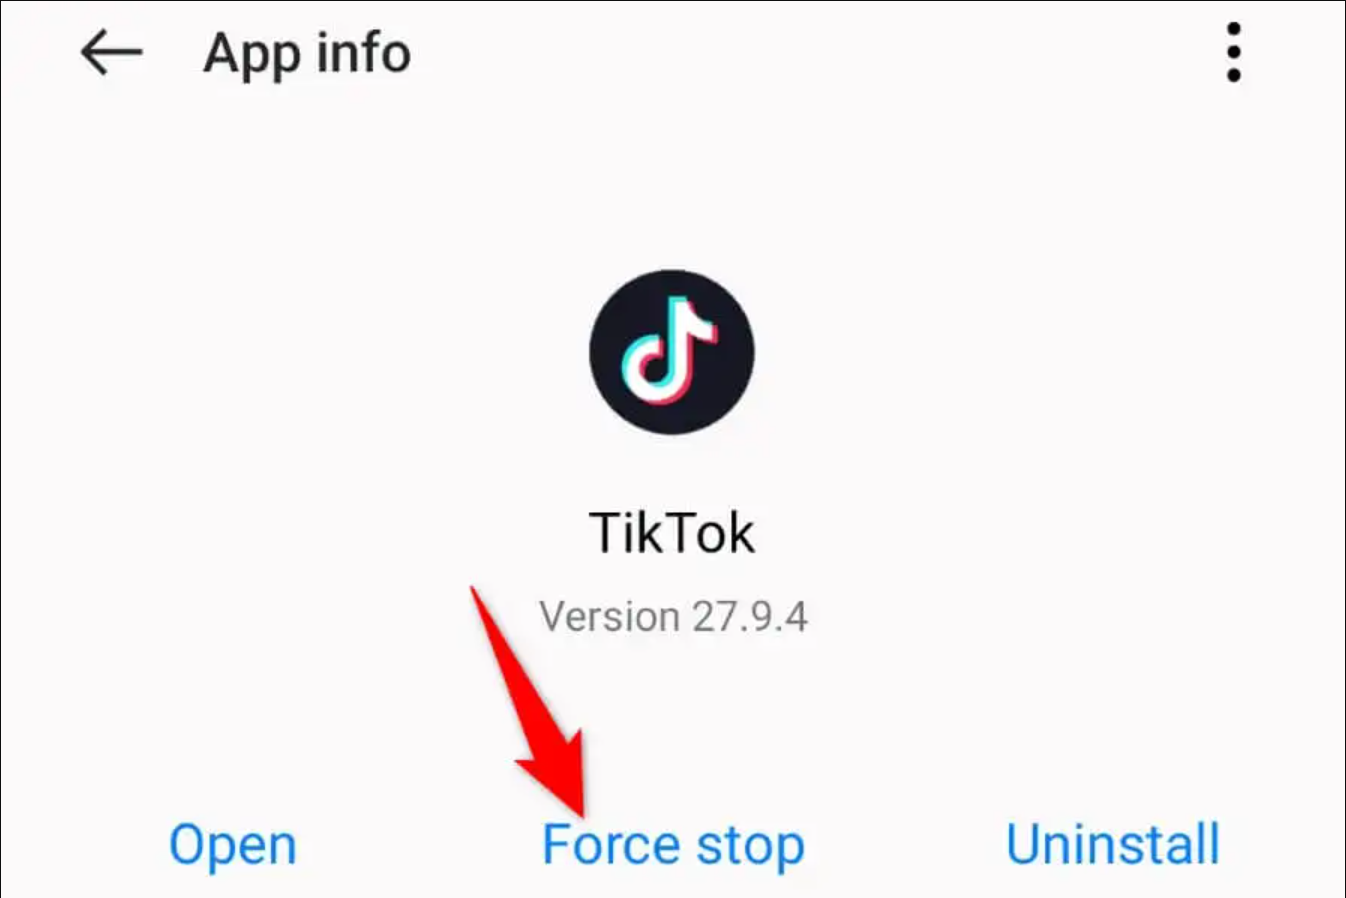 Why does your TikTok app keep crashing? Find out the possible causes and the best solutions to fix this annoying issue.